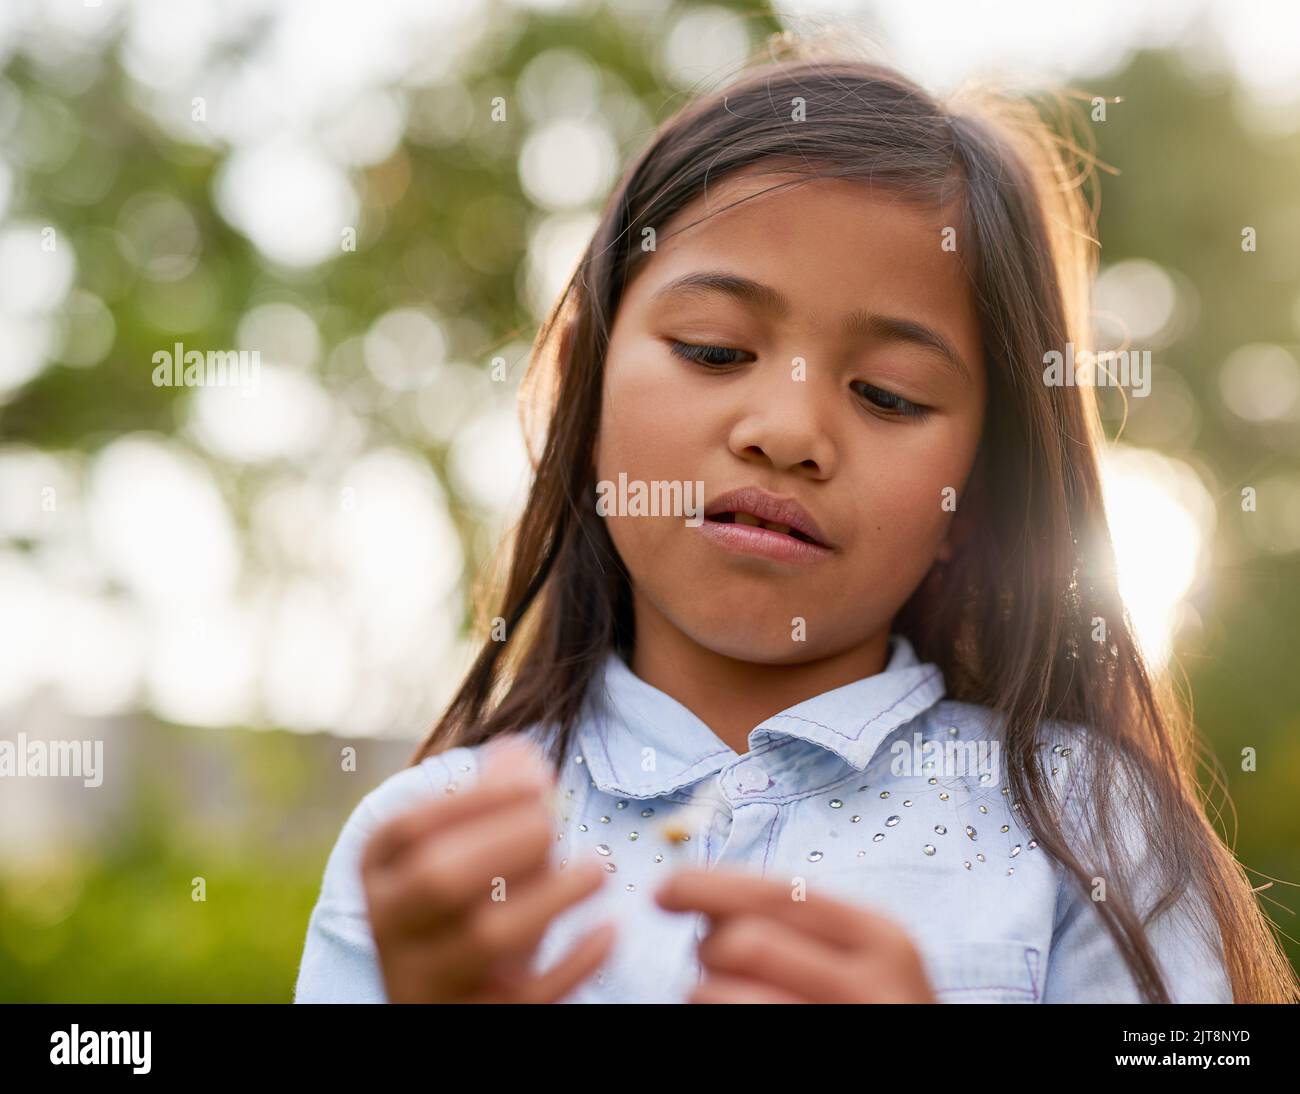 She enjoys exploring the outdoors. a little girl playing outdoors. Stock Photo